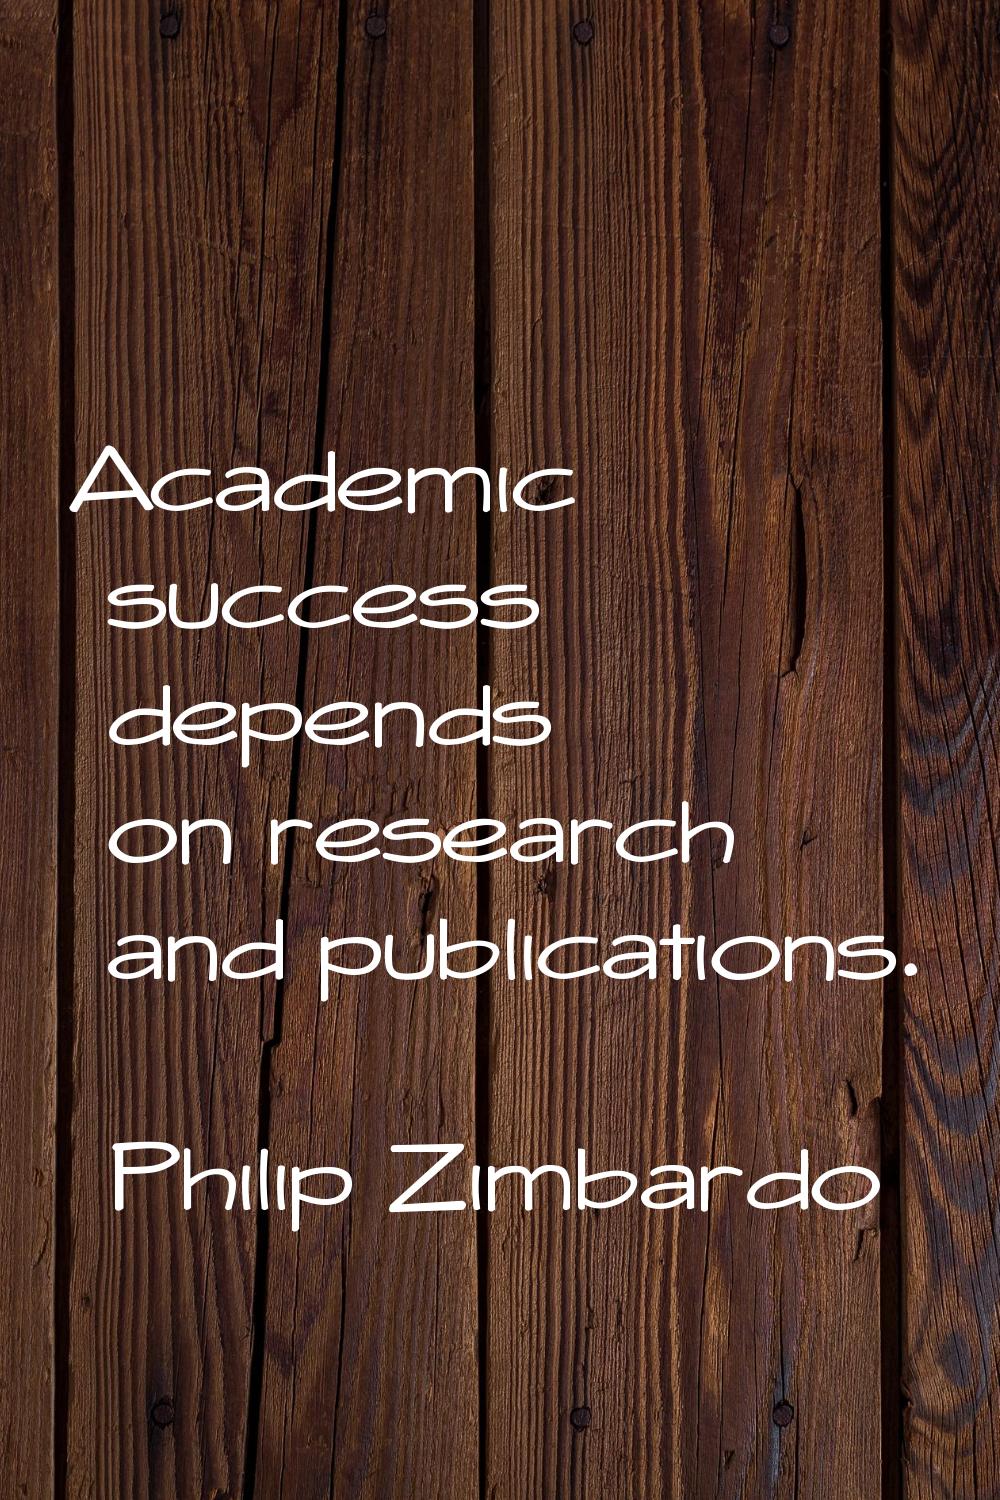 Academic success depends on research and publications.